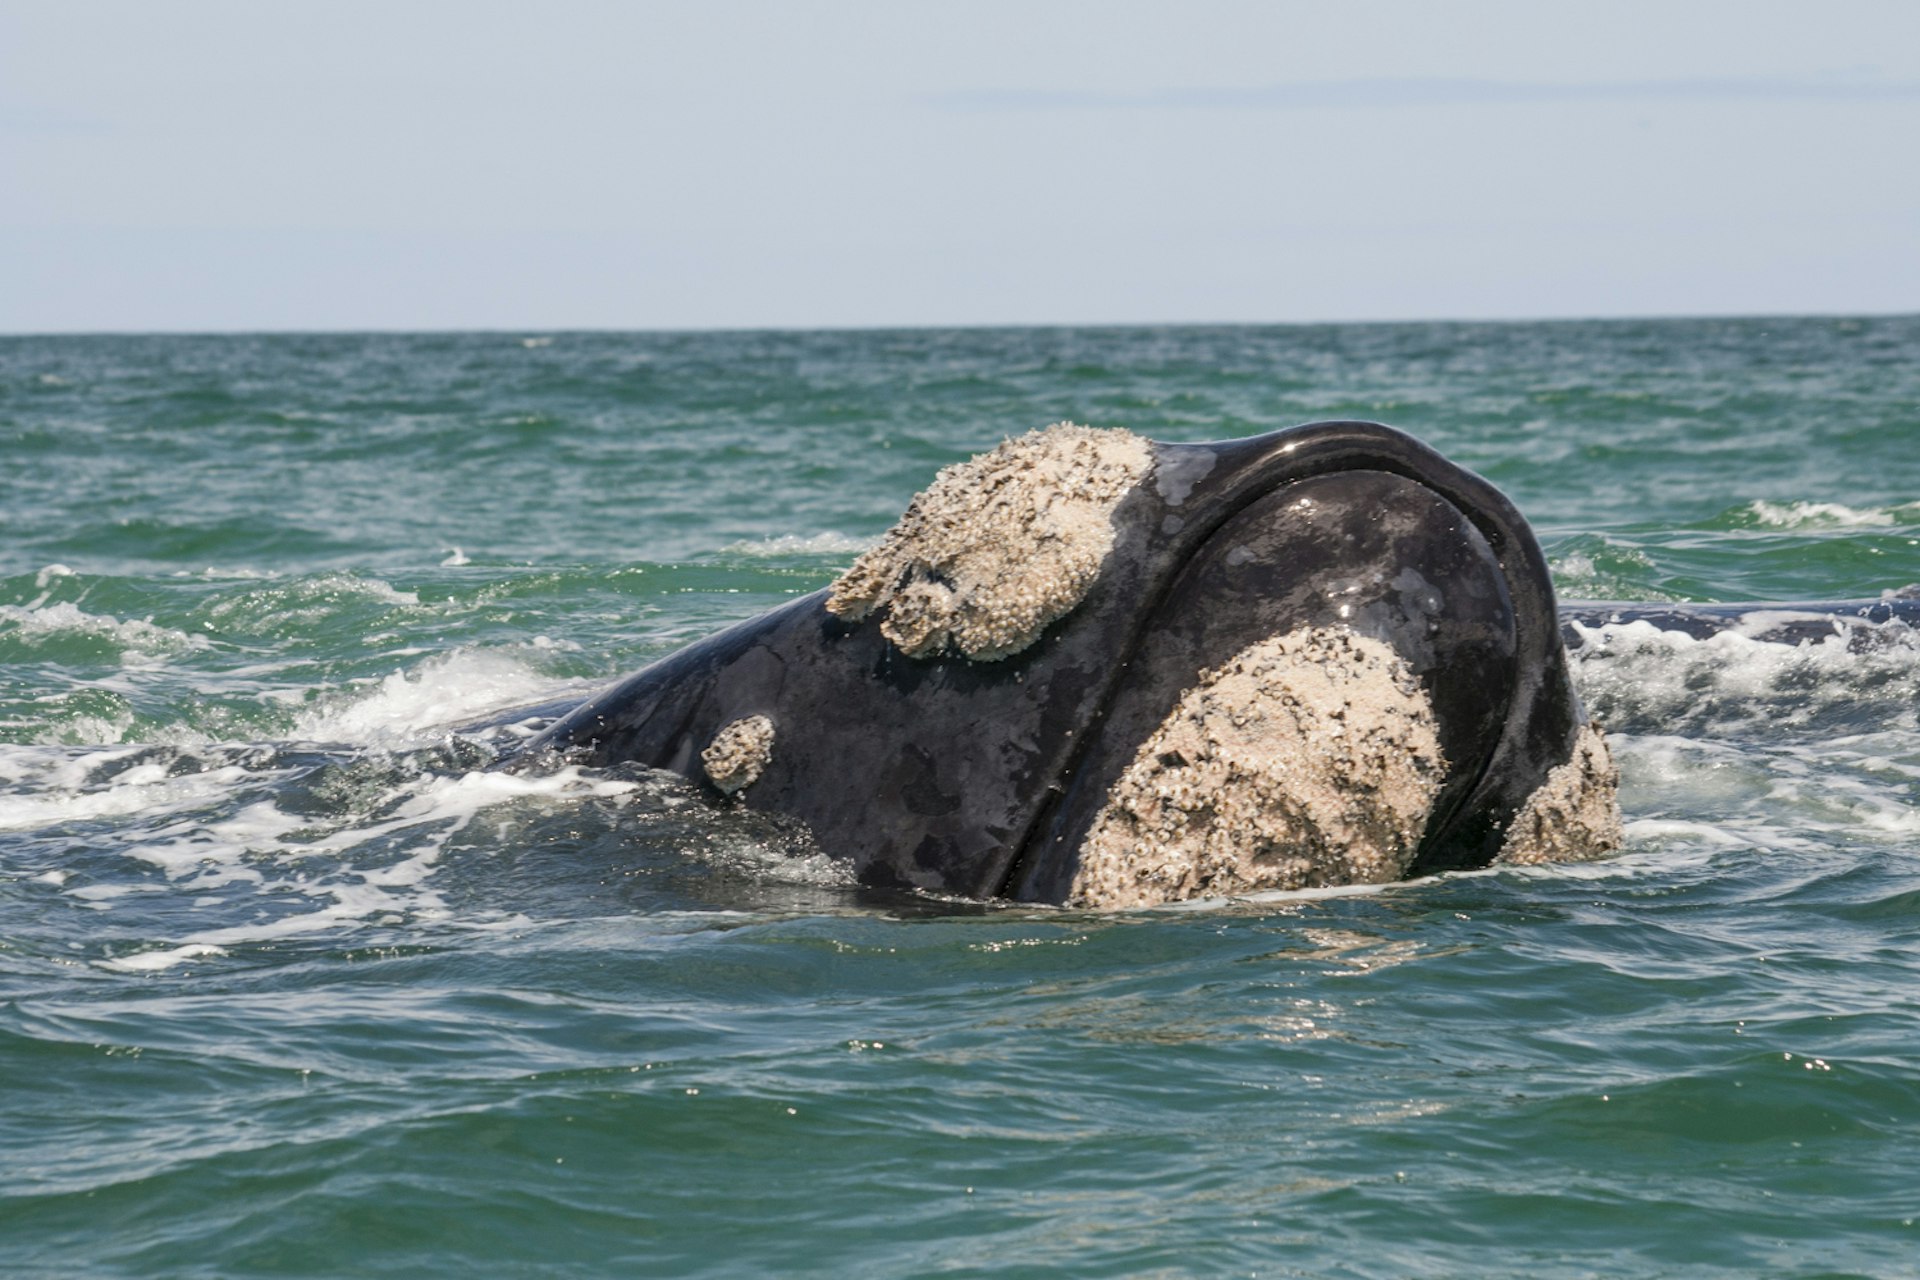 Head of a southern right whale (Eubalaena australis), Gansbaai, South Africa